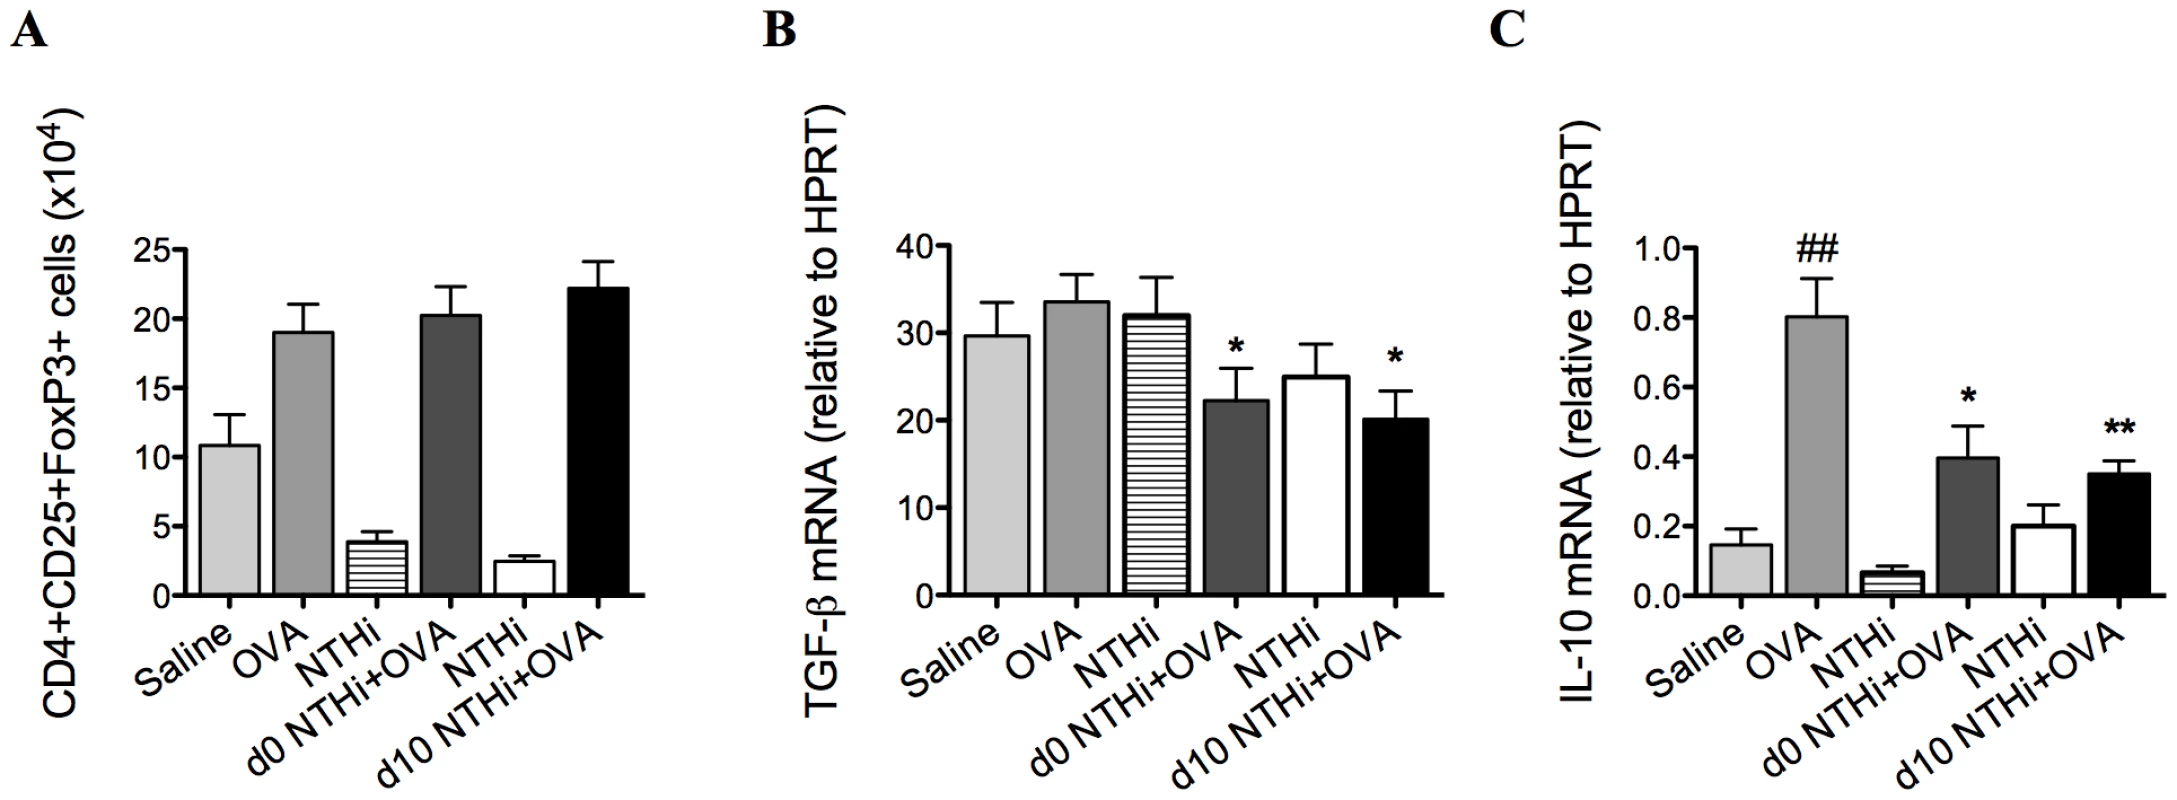 NTHi infection does not affect T regulatory cells in the suppression of AAD.